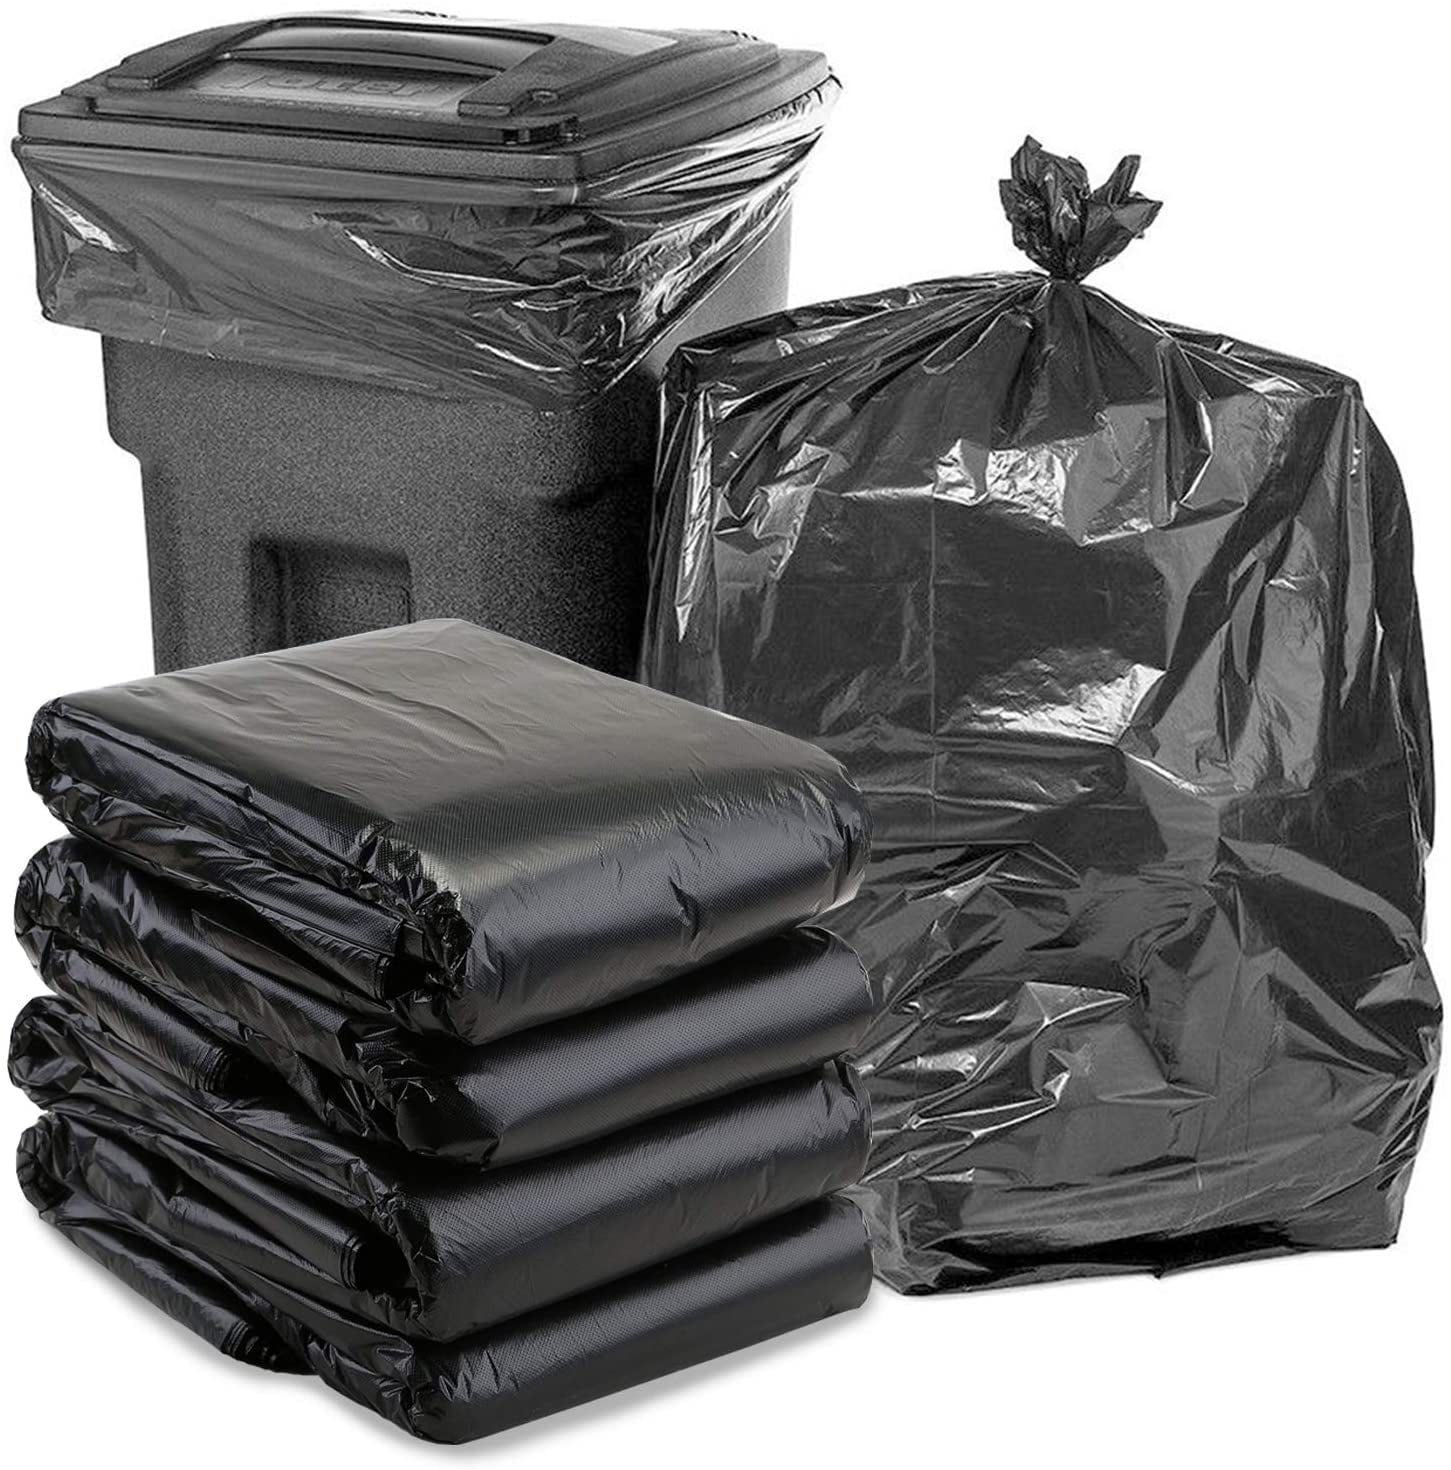 Details about   Toughbag 65 Gallon Trash Bags Black Heavy Duty Garbage Can Liners 1.5 Mil 